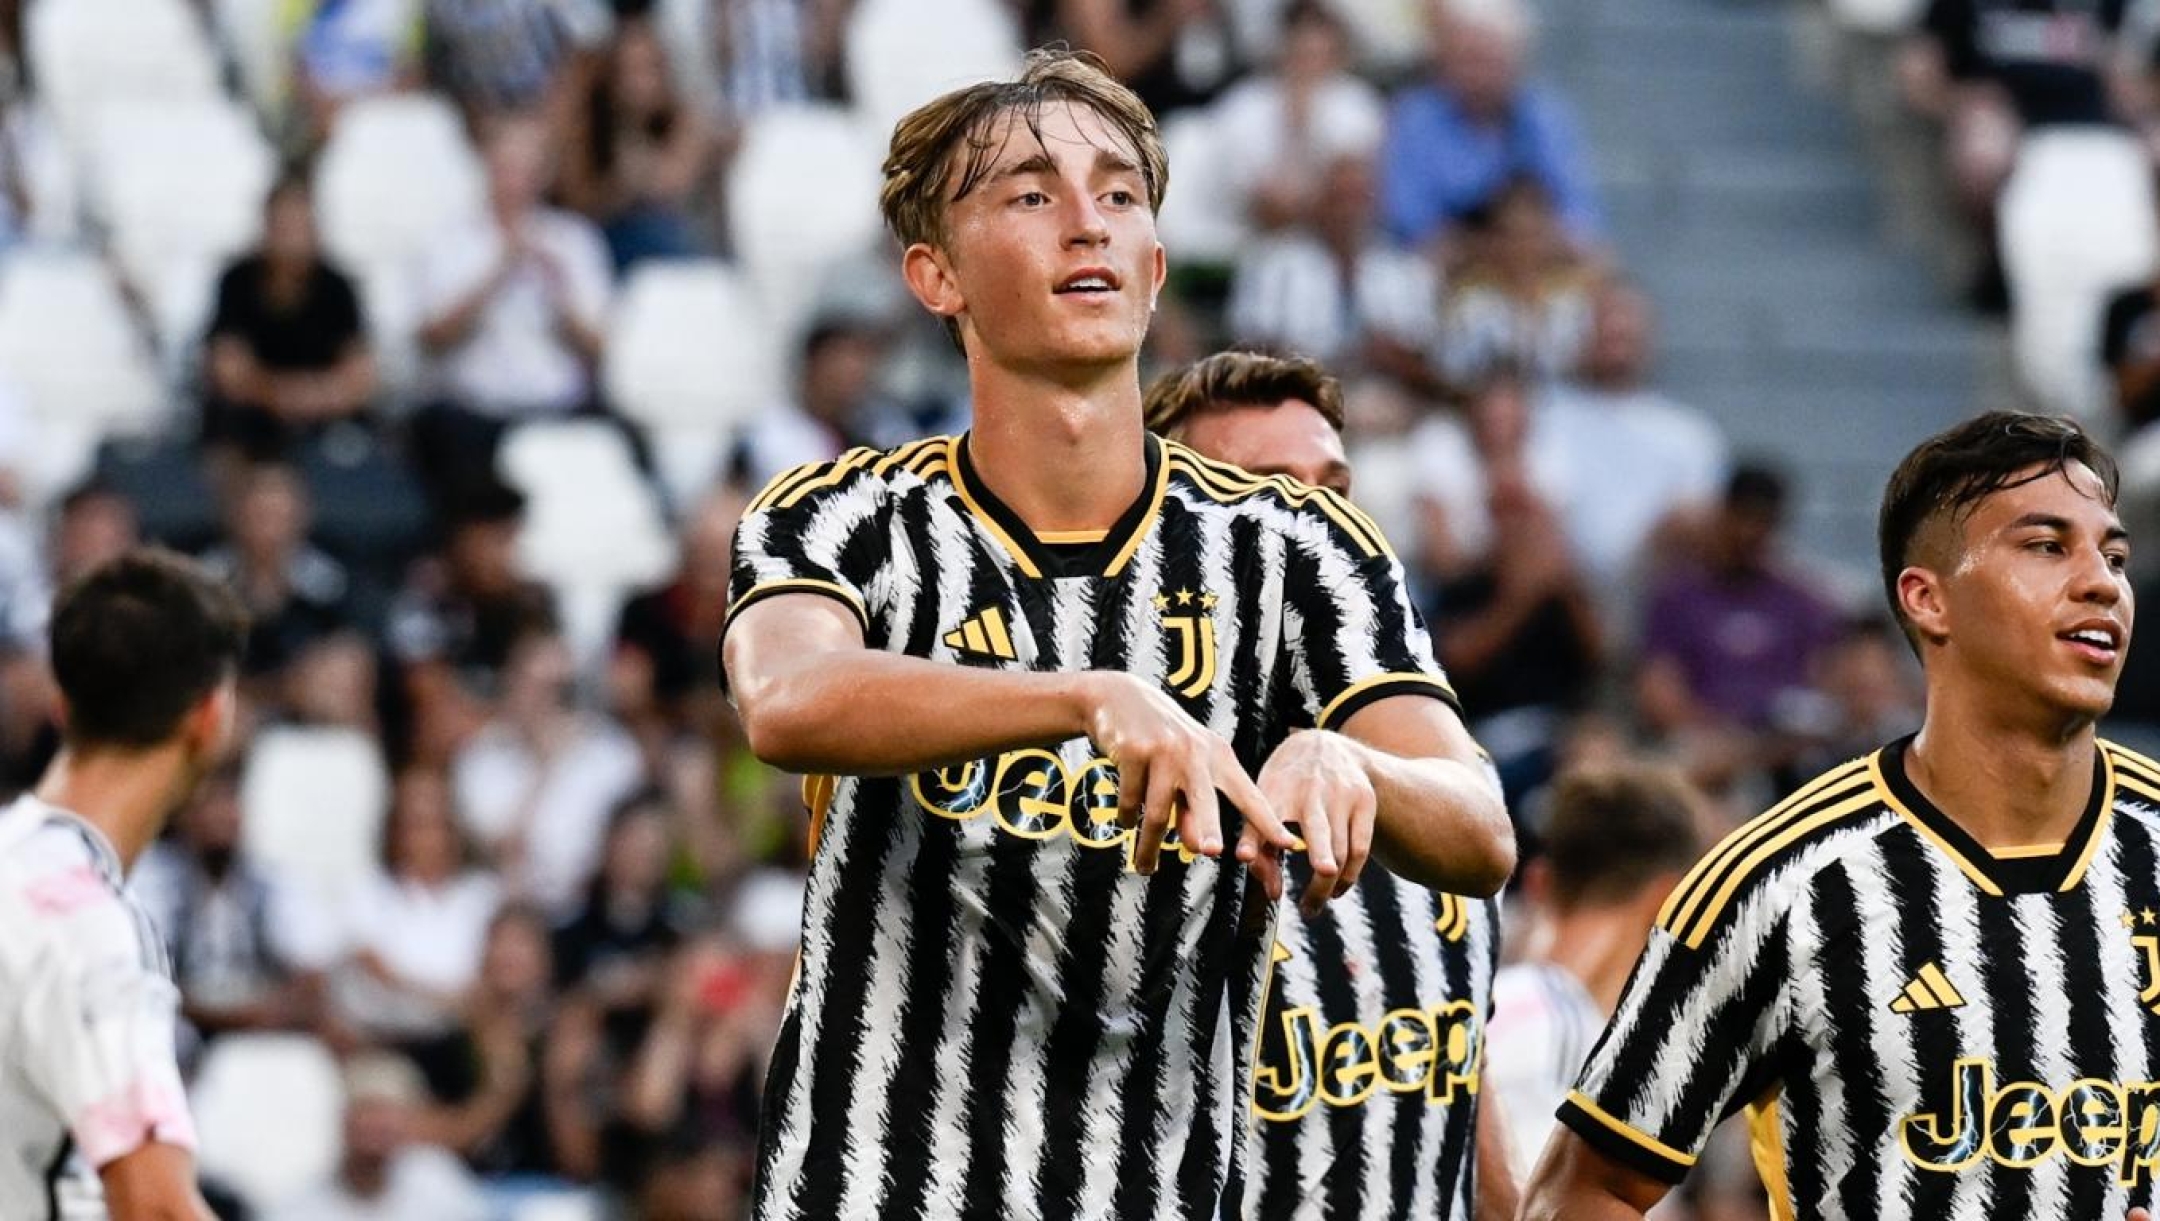 TURIN, ITALY - AUGUST 9: Dean Huijsen of Juventus celebrates during the friendly match between Juventus A and Juventus B at Allianz Stadium on August 9, 2023 in Turin, Italy. (Photo by Daniele Badolato - Juventus FC/Juventus FC via Getty Images)